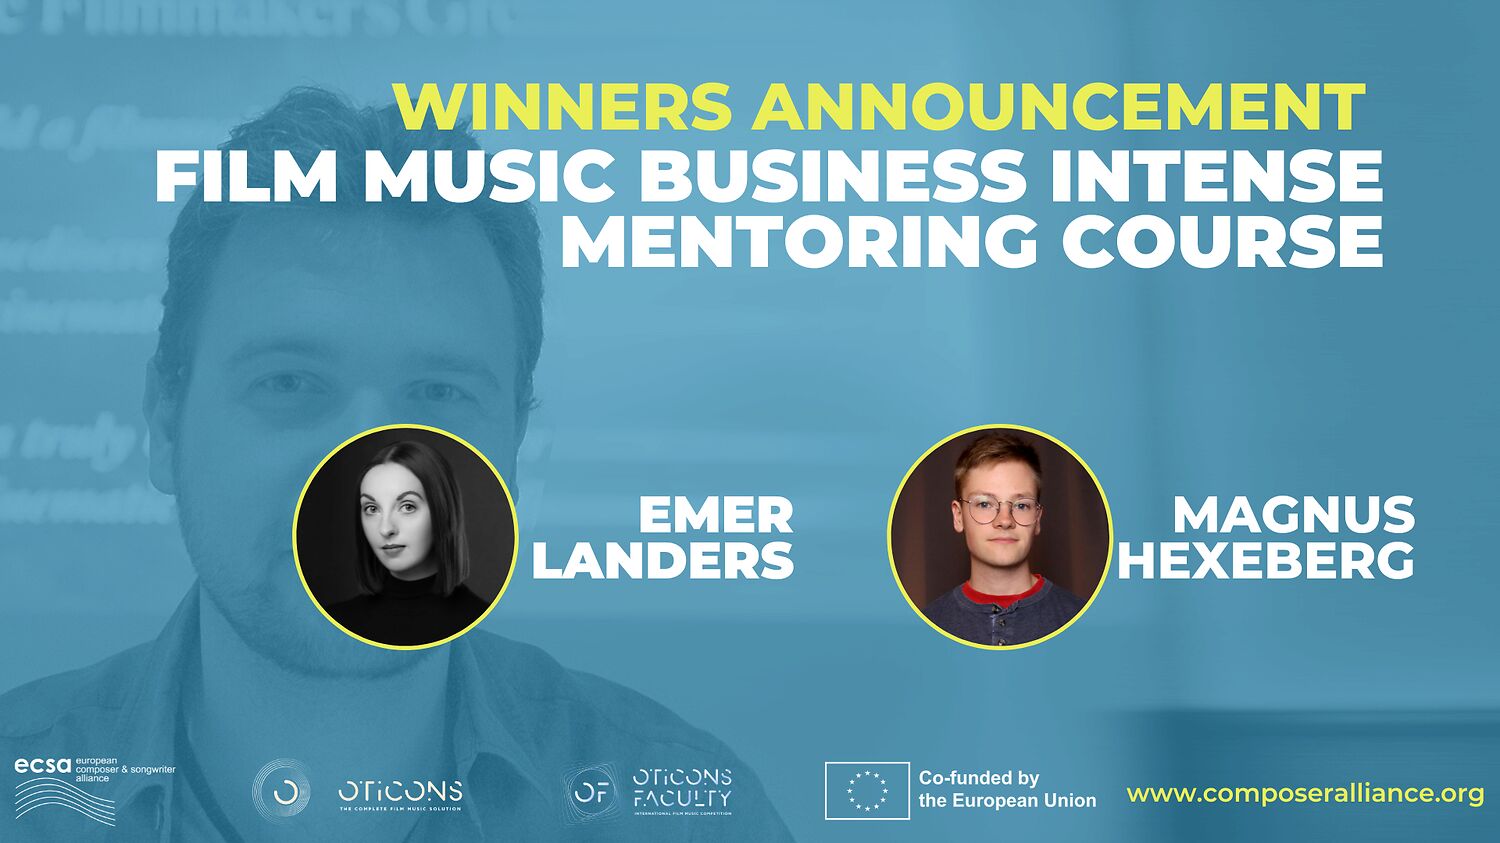 Oticons Film Music Business mentoring course: winners announced!